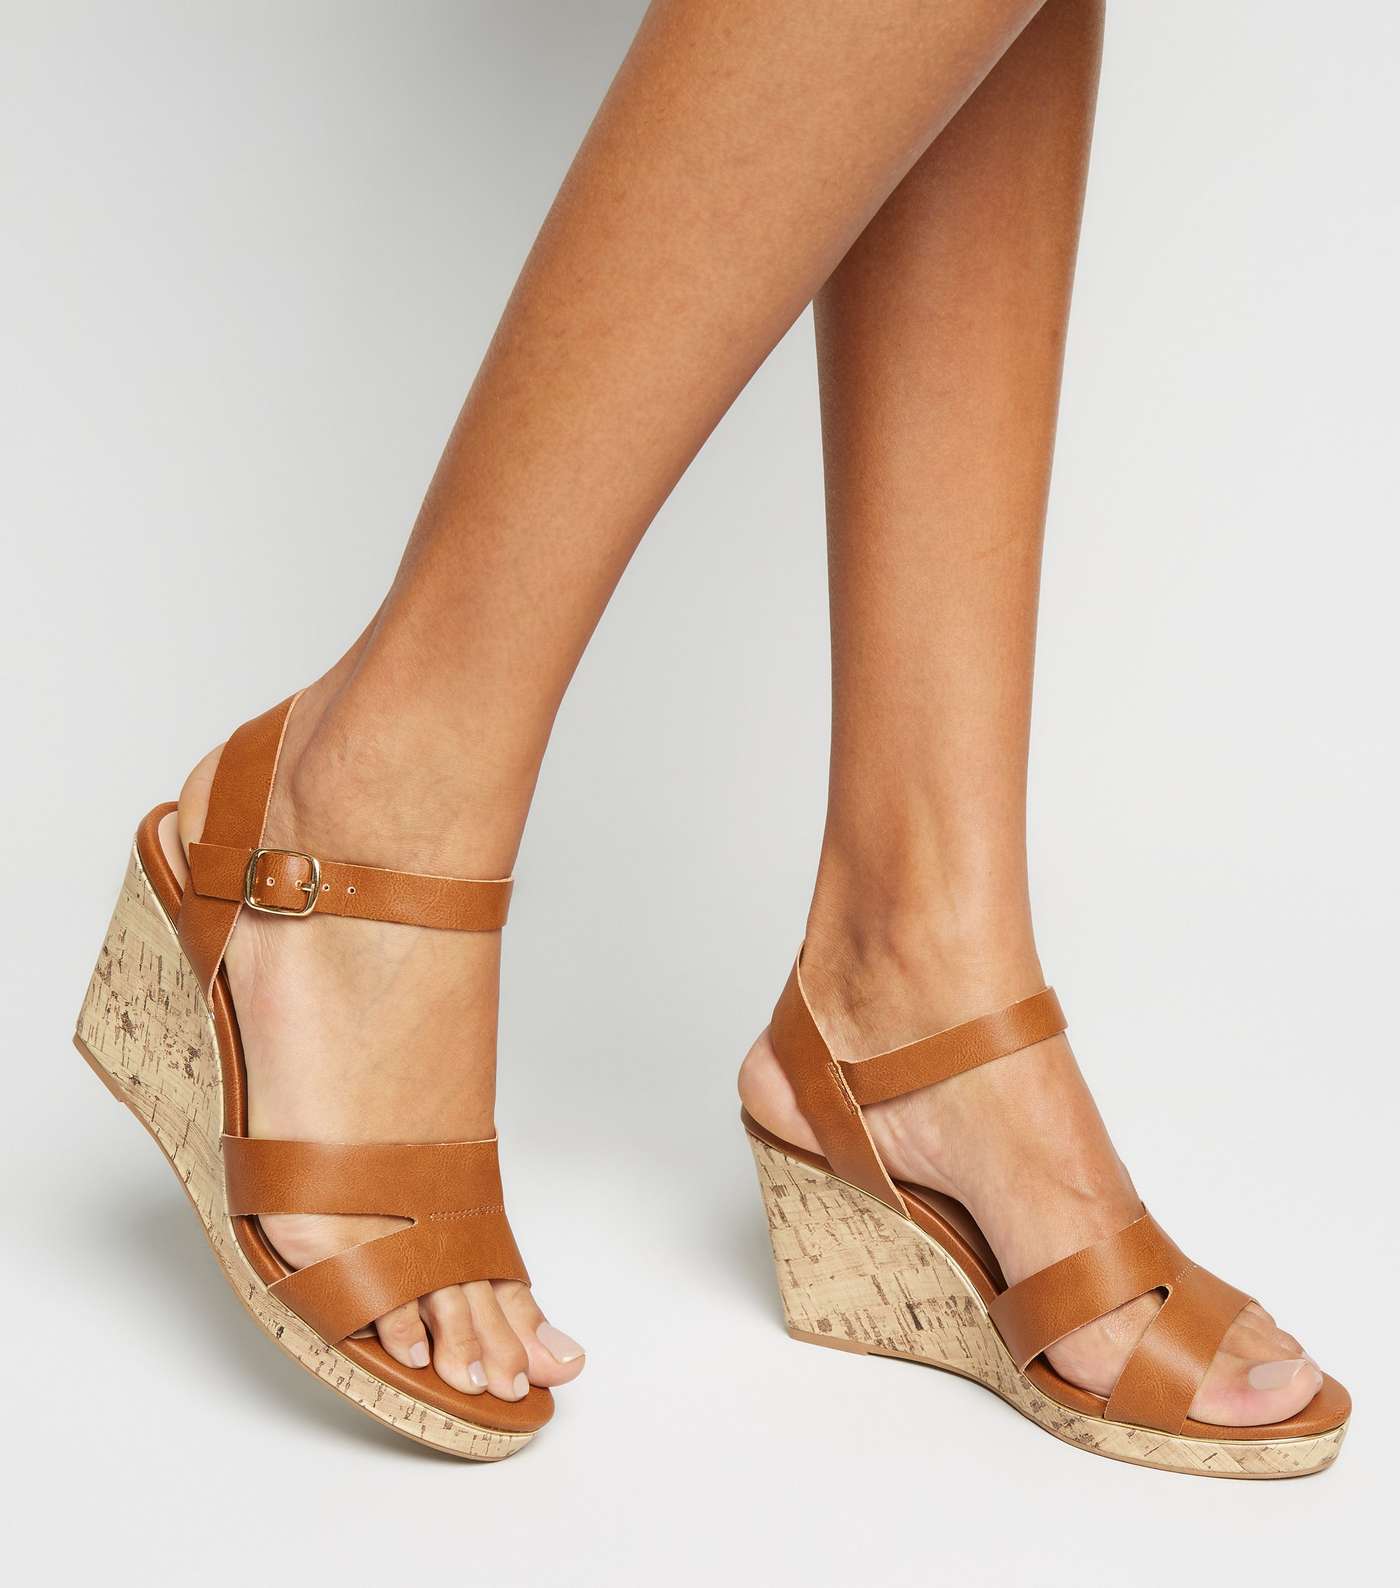 Wide Fit Tan Leather-Look Cork Wedges Image 2